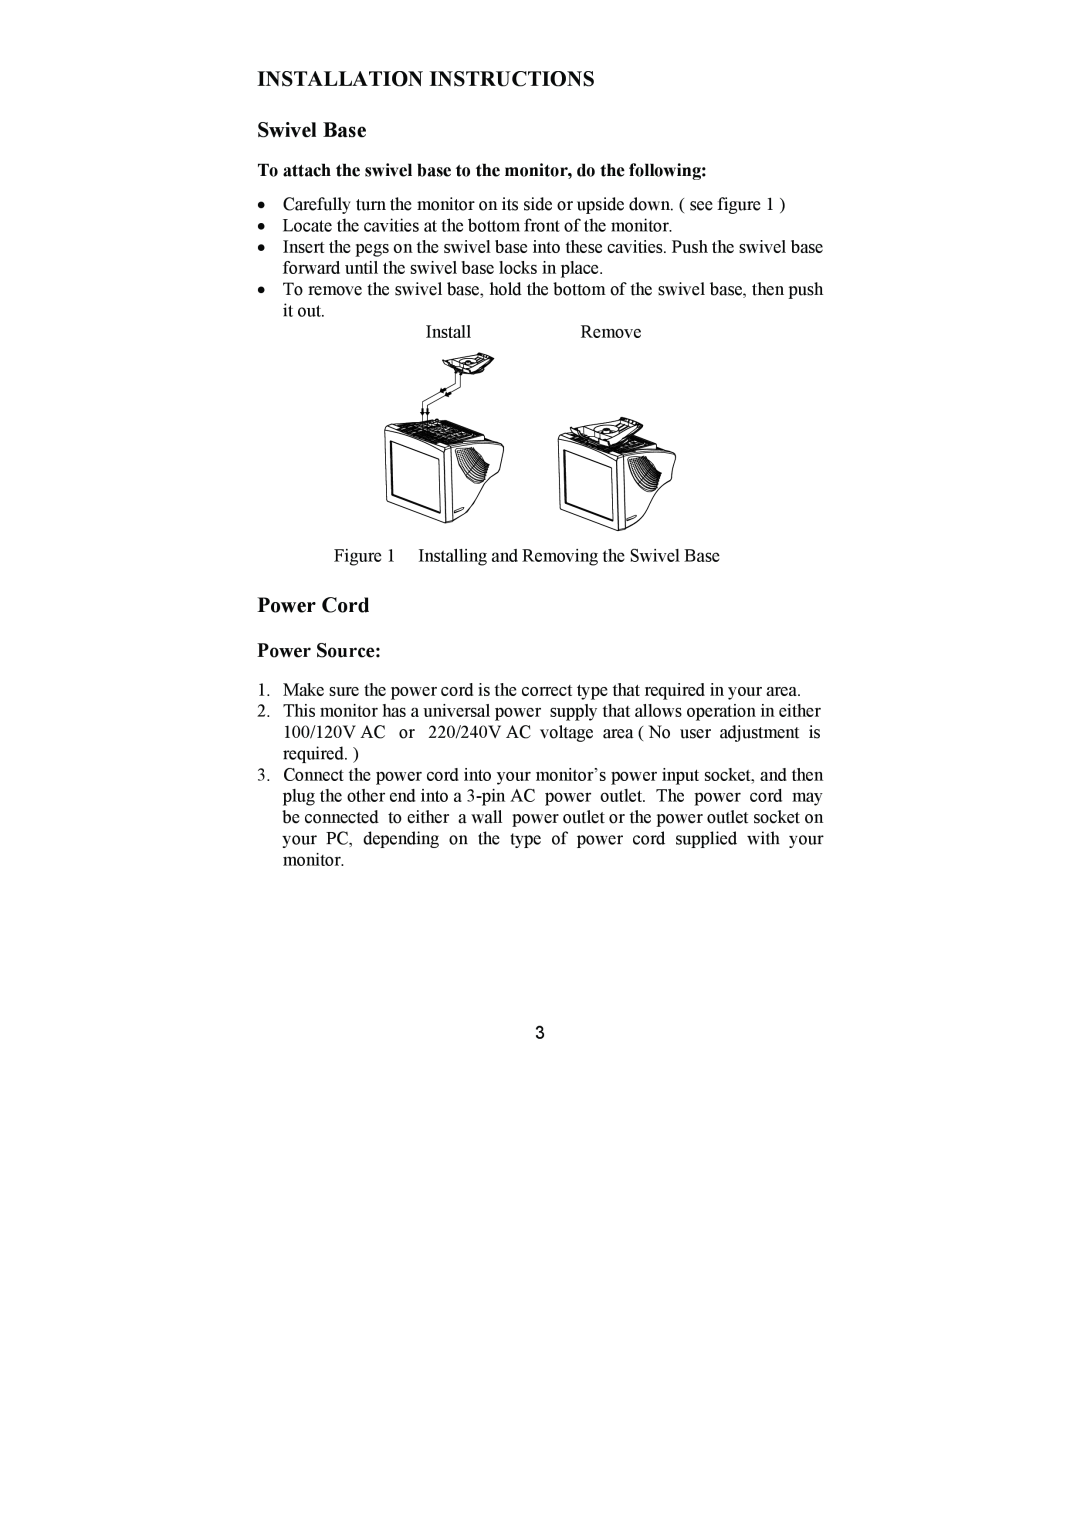 Philips 107E69 manual INSTALLATION INSTRUCTIONS Swivel Base, Power Cord, Power Source 